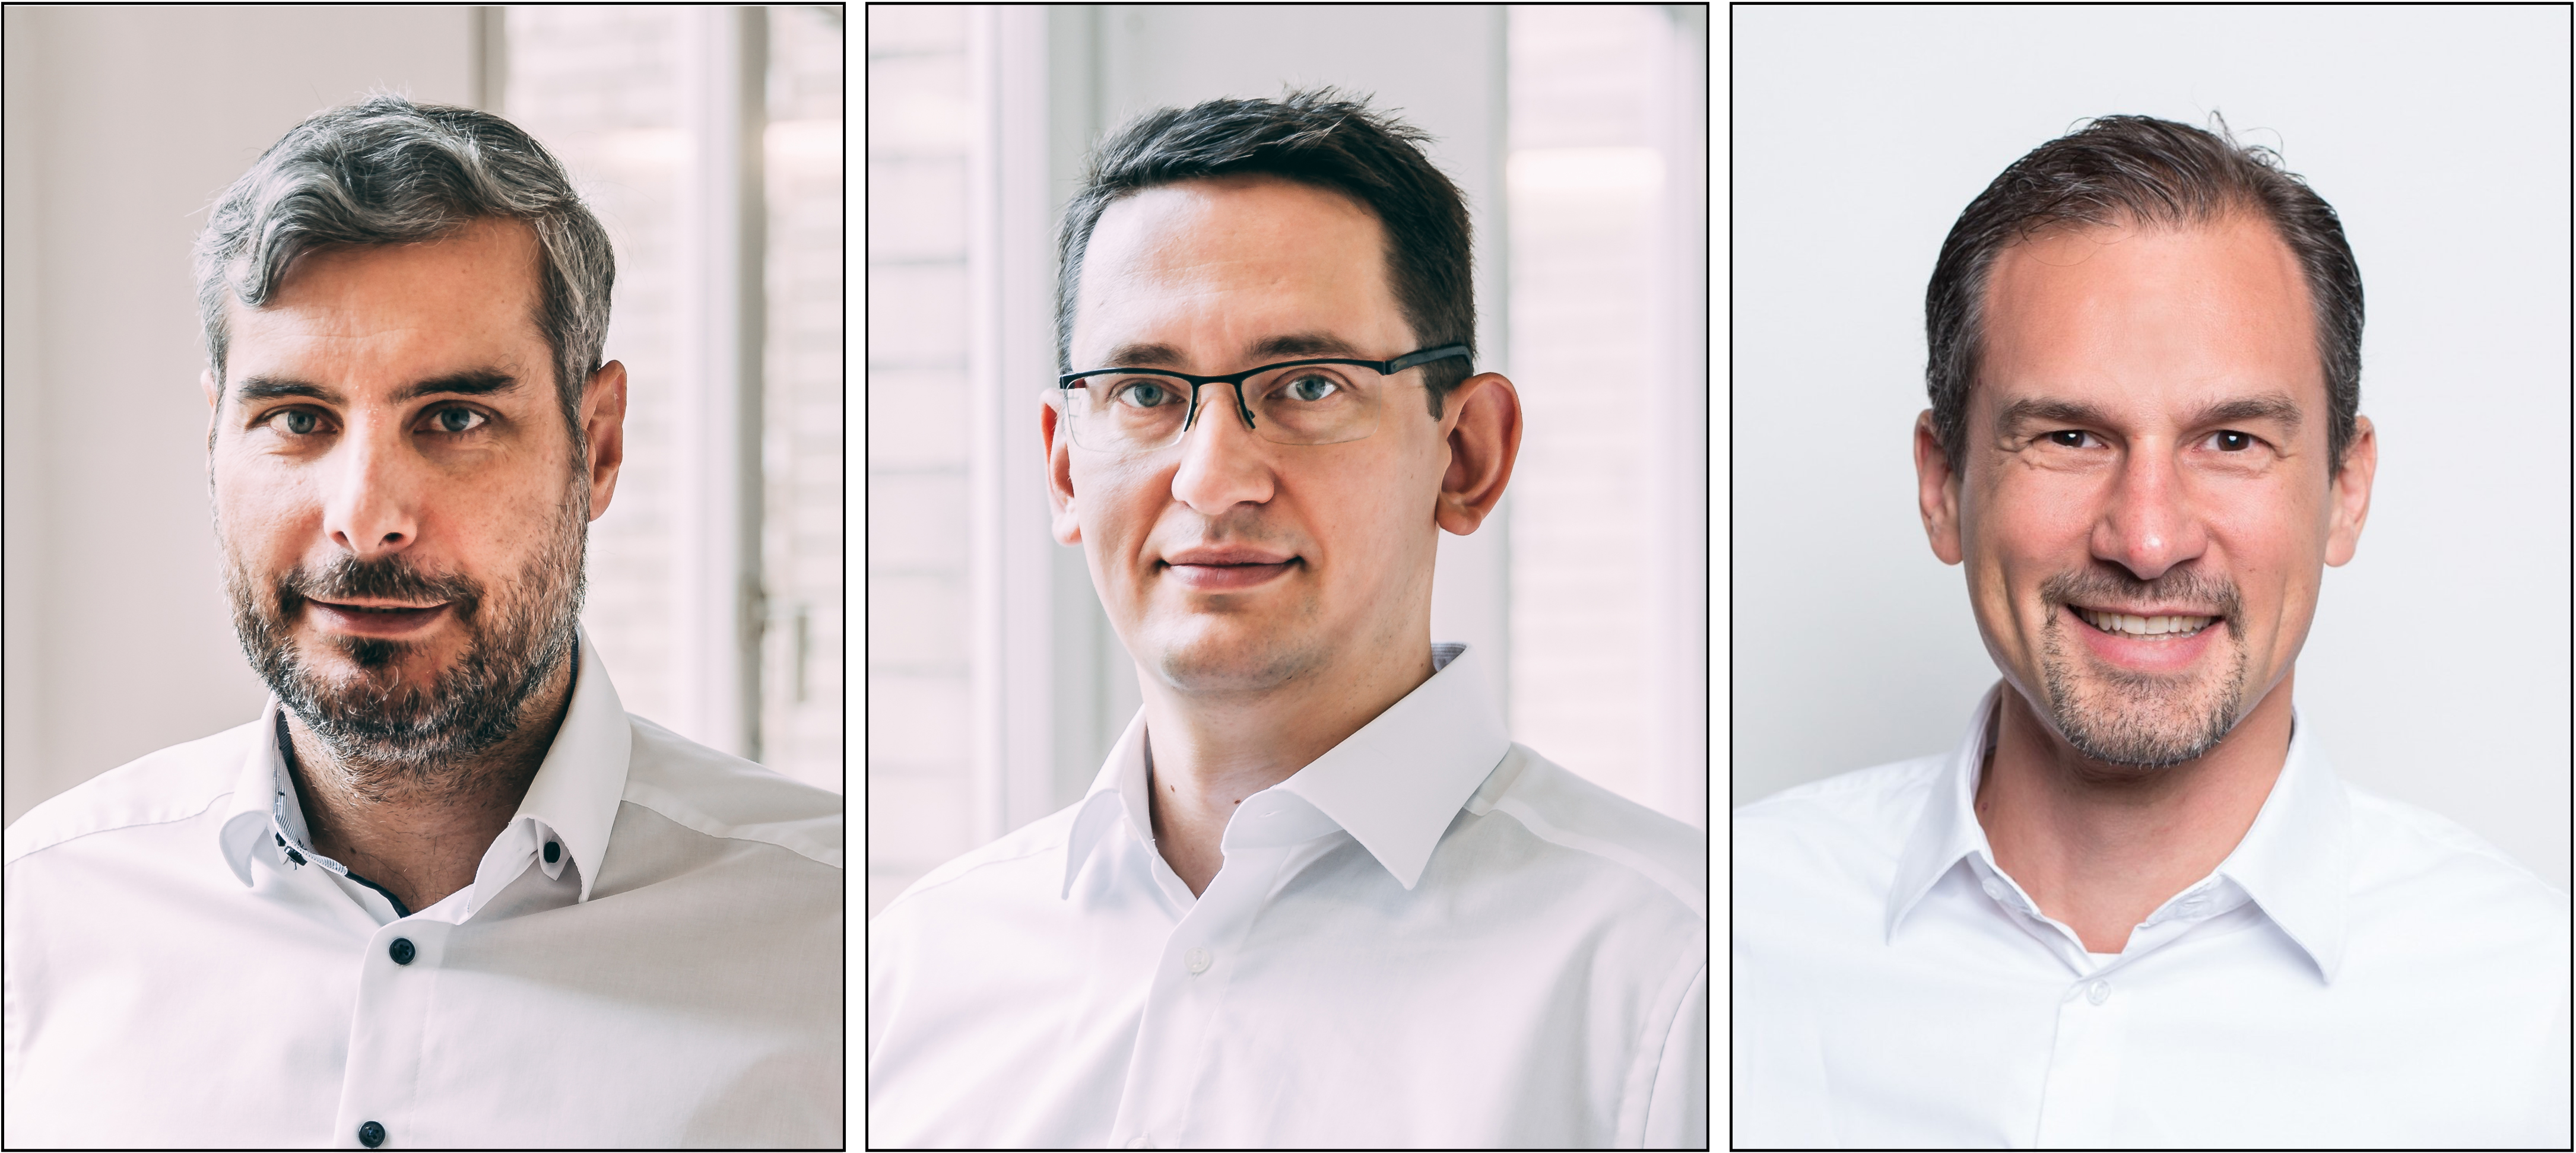 Portrait photos of the three founders of Thericon. On the left, a man with short, slightly graying hair and a full beard; in the middle, a man with short dark hair and glasses; and on the right, a friendly smiling man with short dark hair and a short beard.